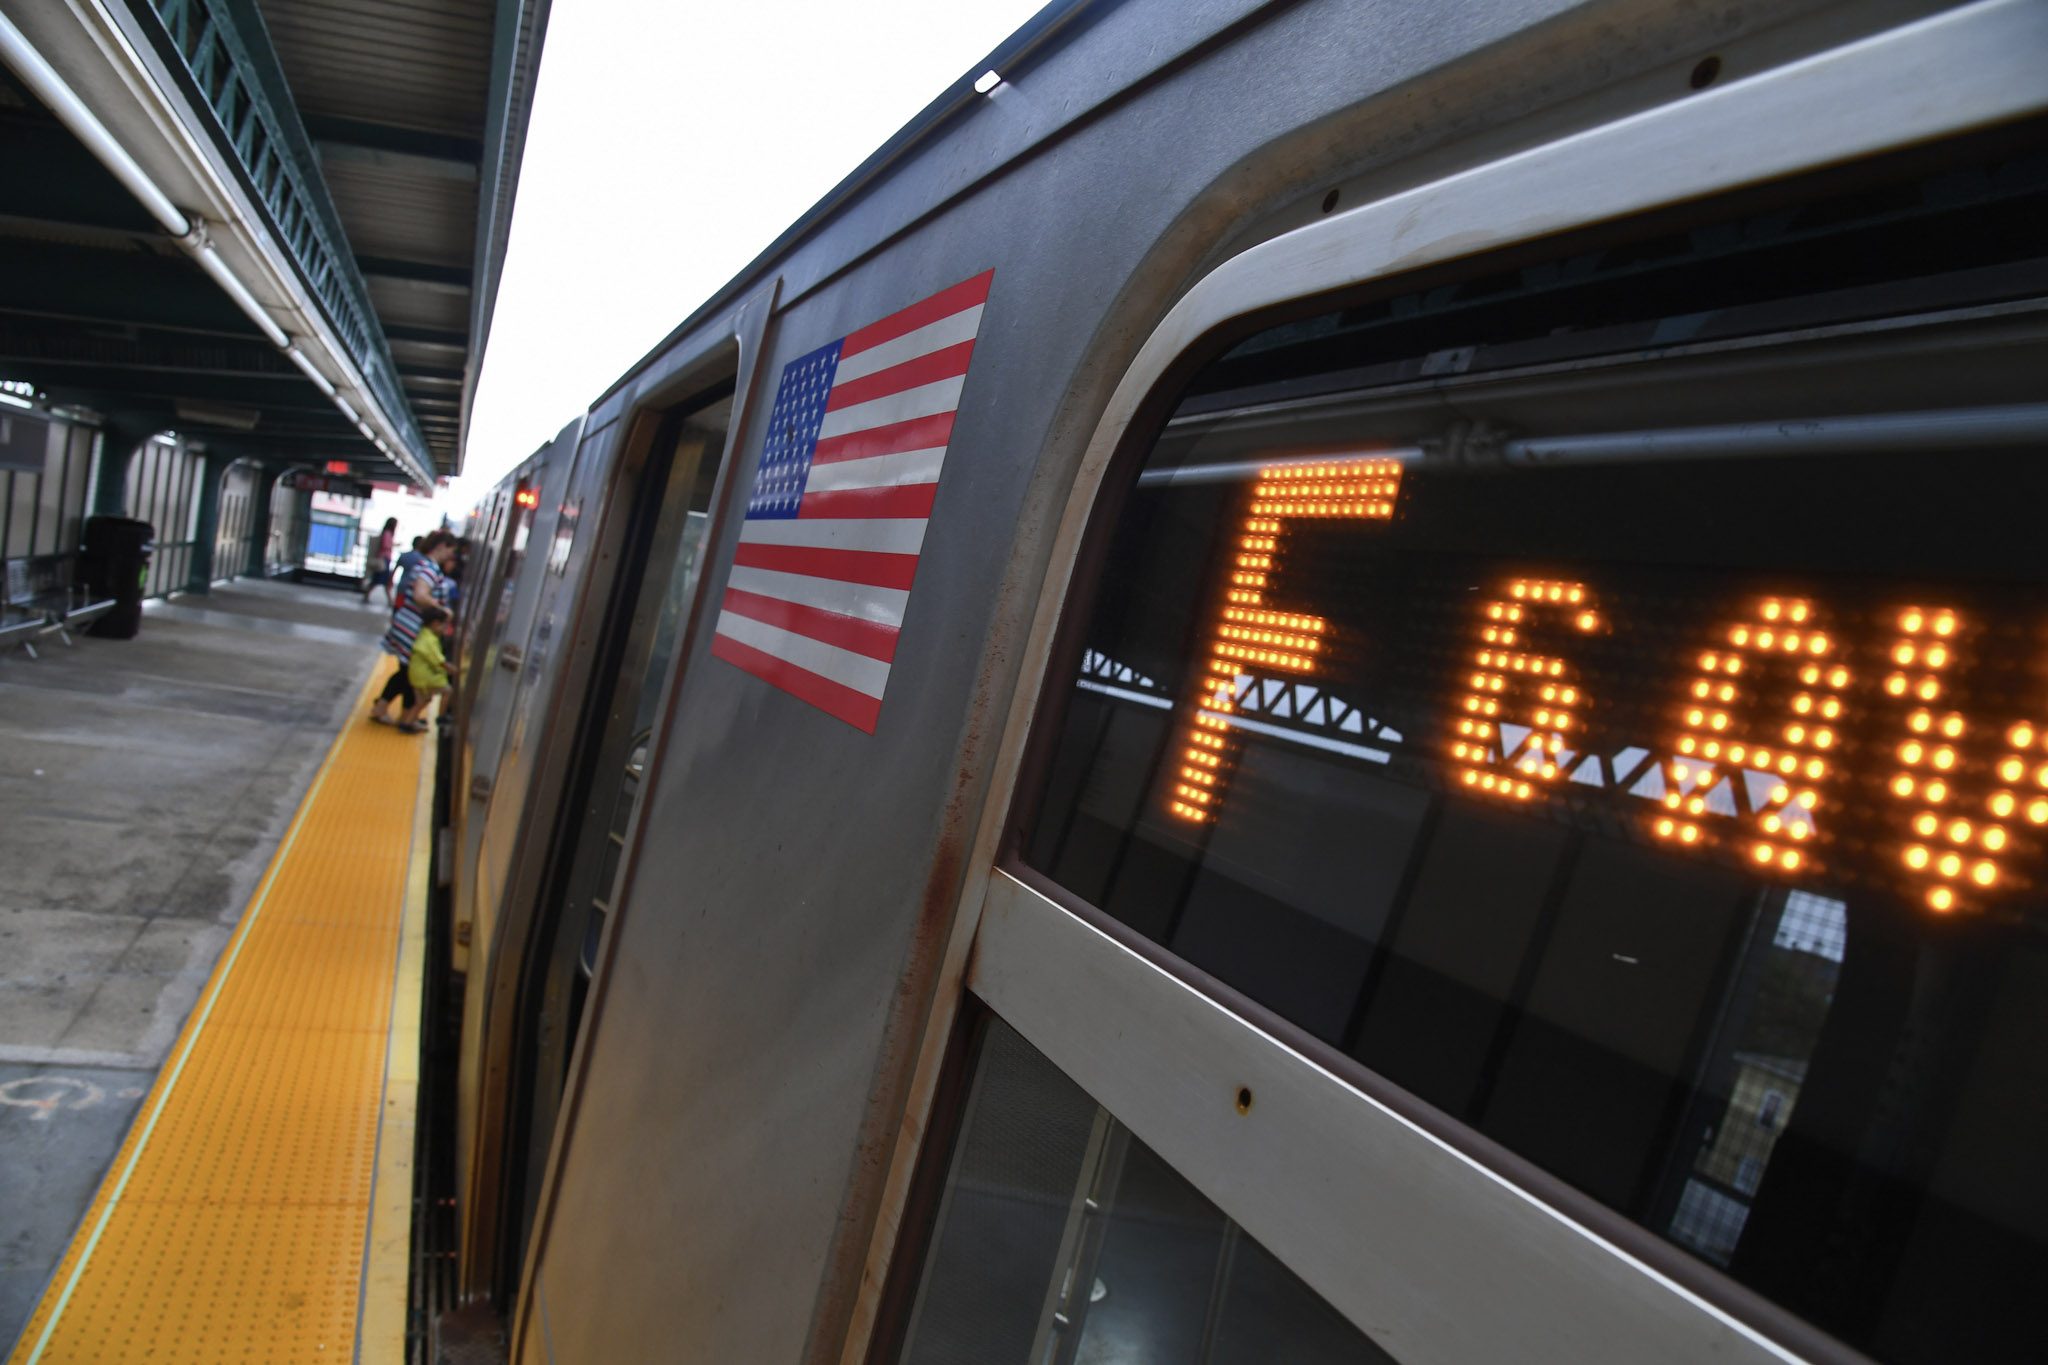 An F train stopped at a platform, with riders boarding the train.